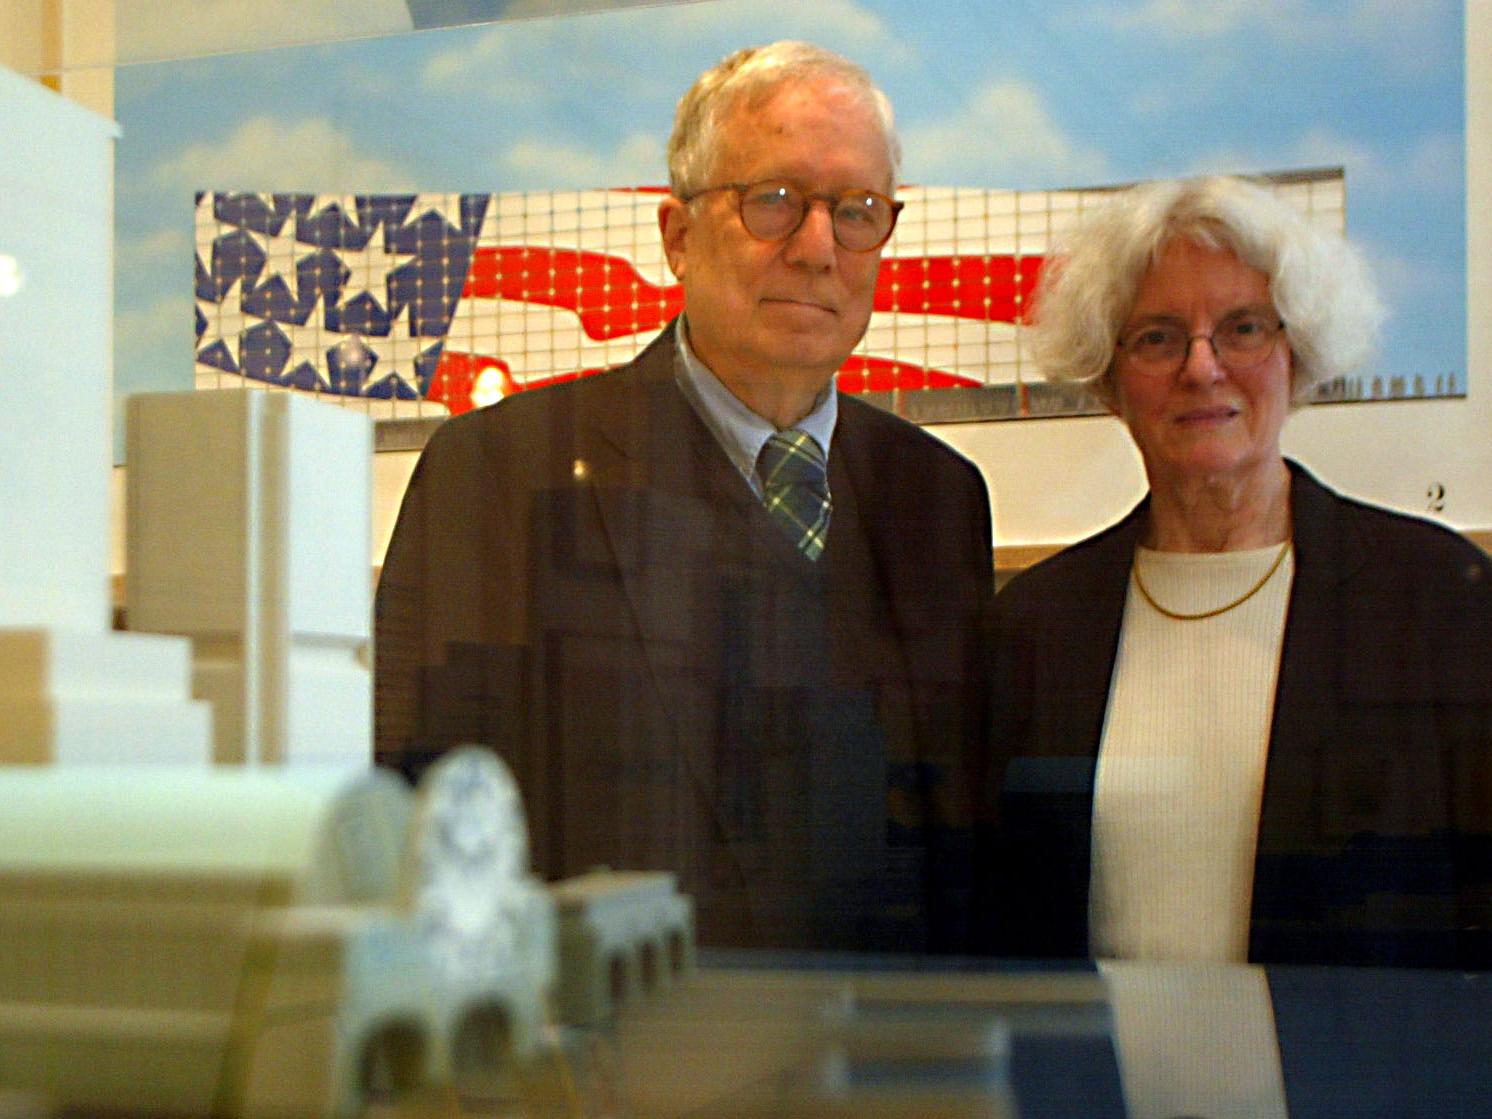 Venturi with his wife Denise Scott Brown at San Diego's Museum of Contemporary Art, parts of which they helped to design